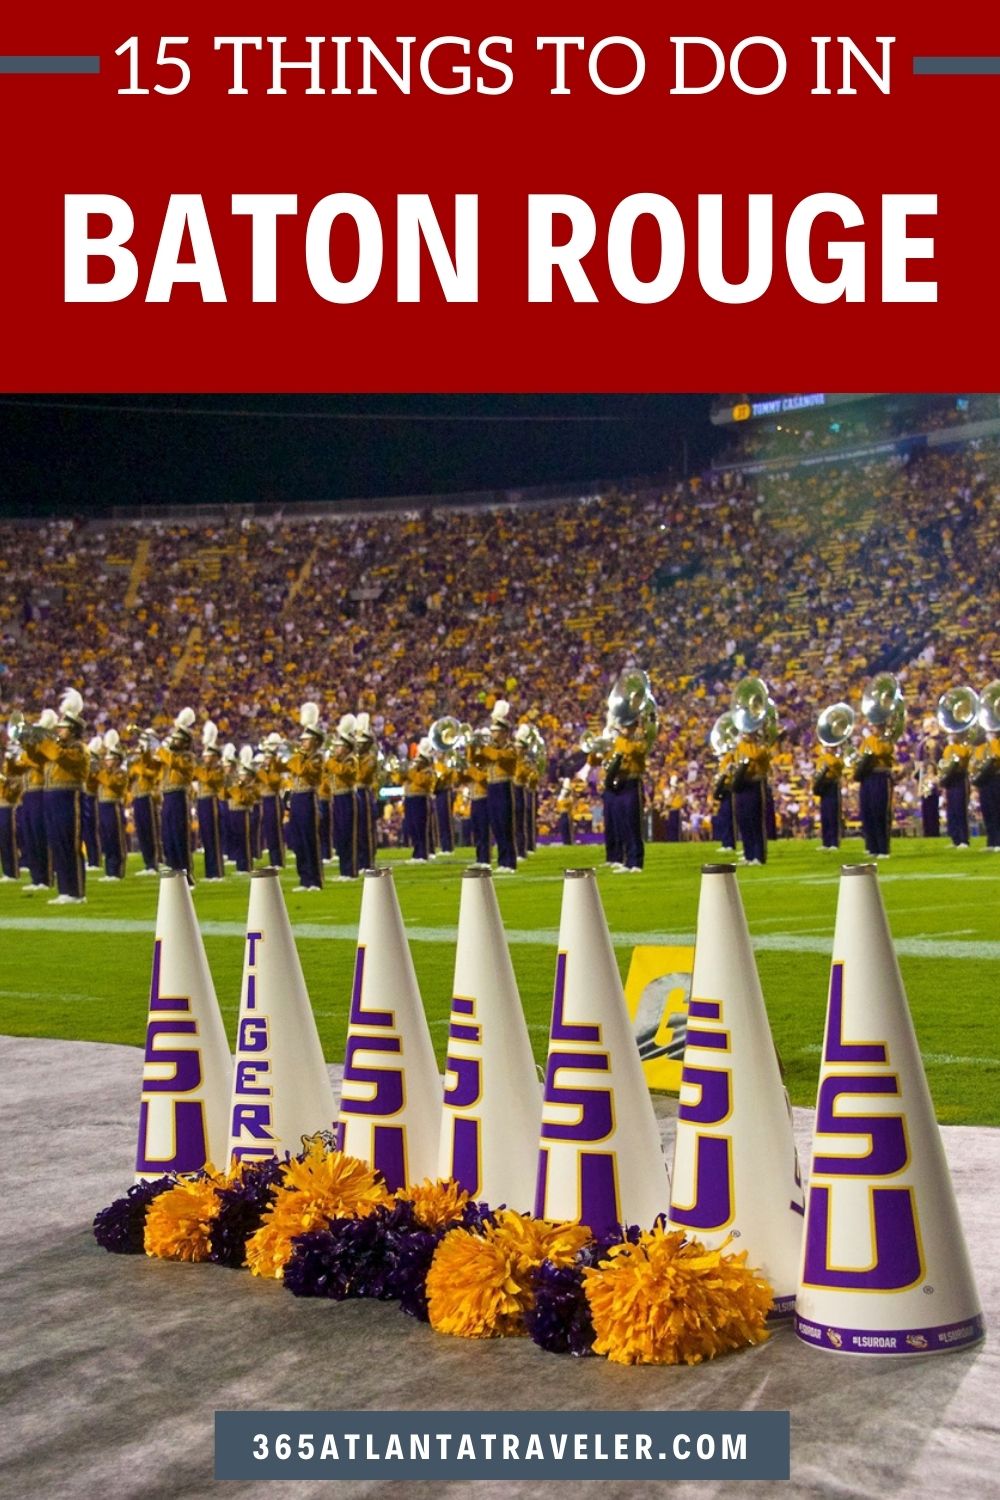 15 Awesome Things To Do in Baton Rouge, Louisiana